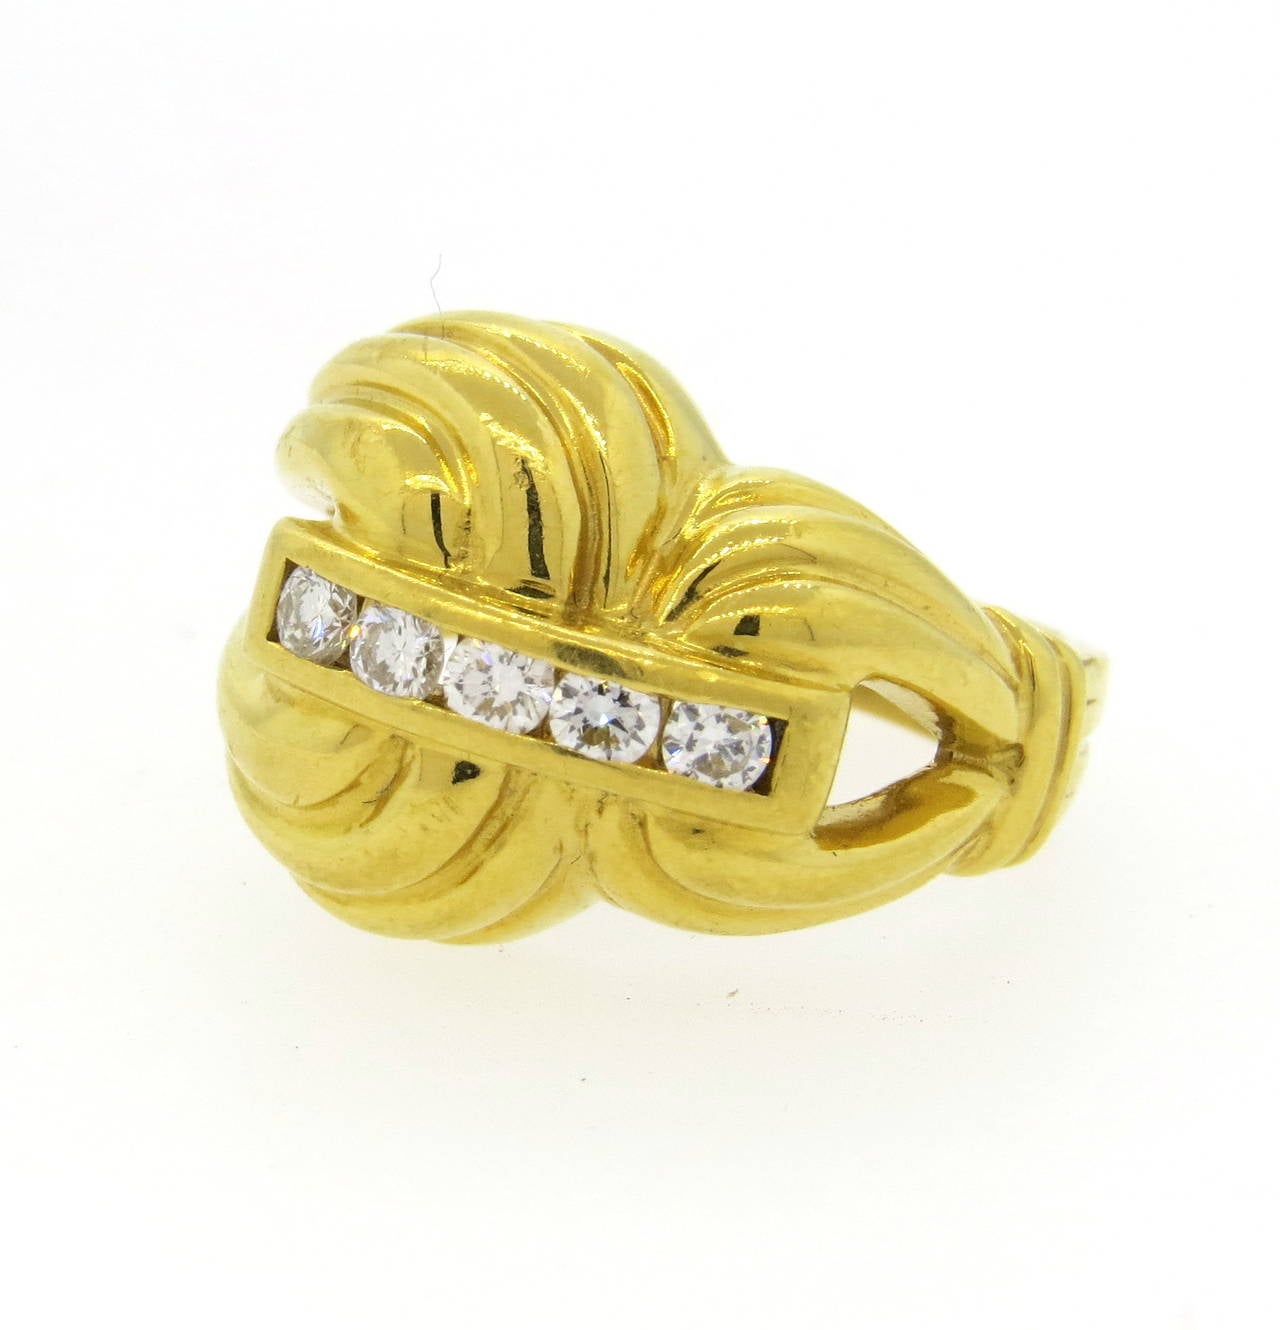 A 22k gold ring set with approx. 0.40cts in G/VS diamonds.  Crafted by Stephen Lagos, the ring is a size 6.25 and 16.5mm at the widest point.  The weight of the piece is 14.4 grams.